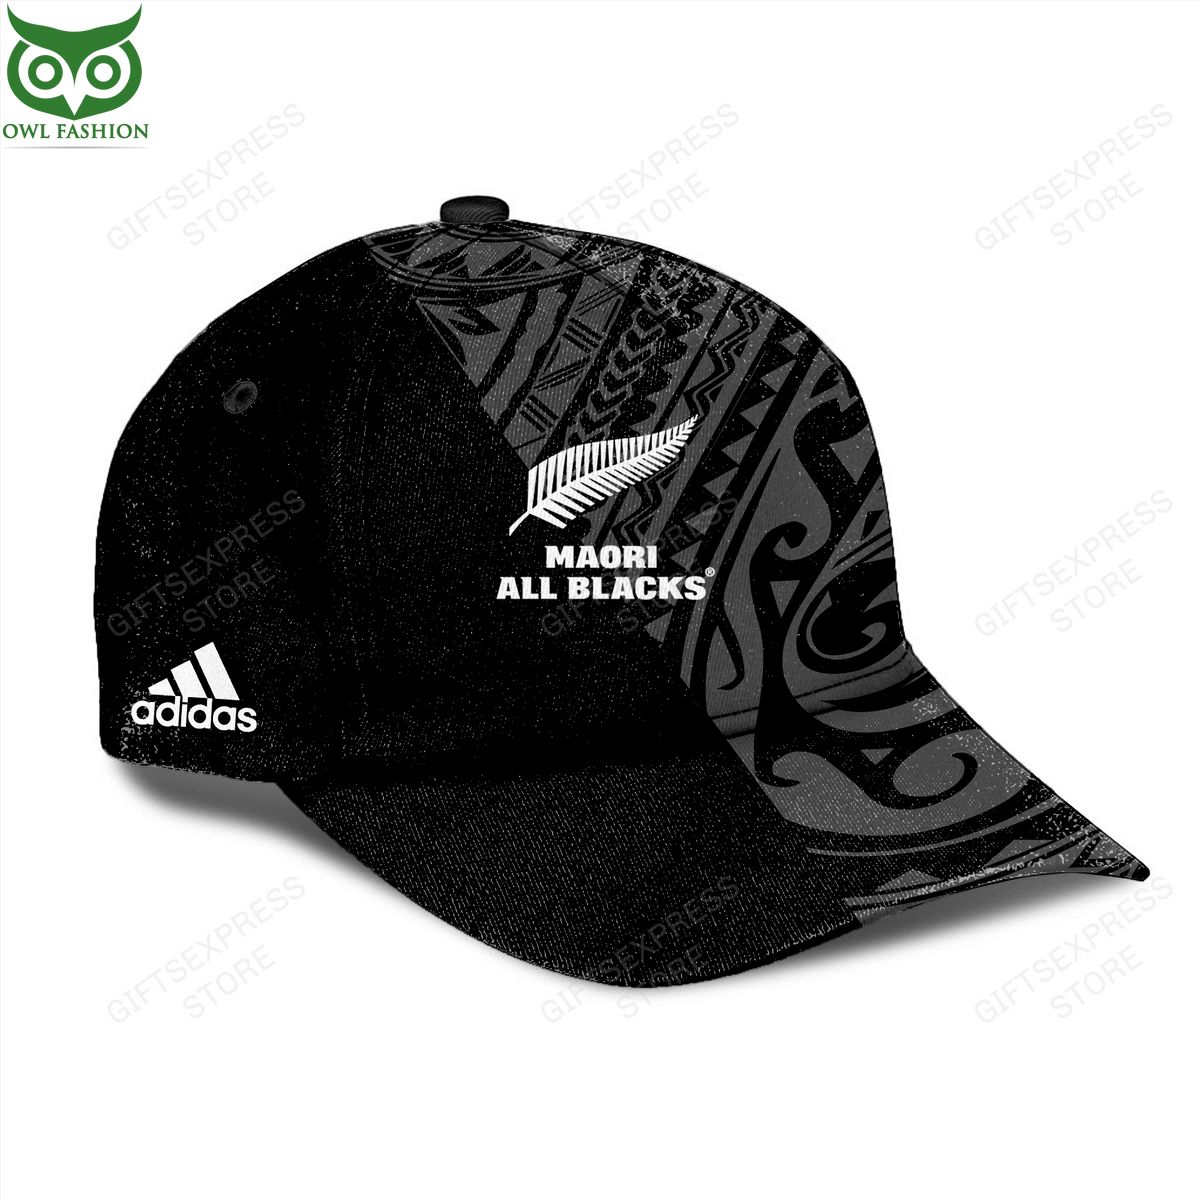 All Blacks Maori Limited Classic Cap Natural and awesome